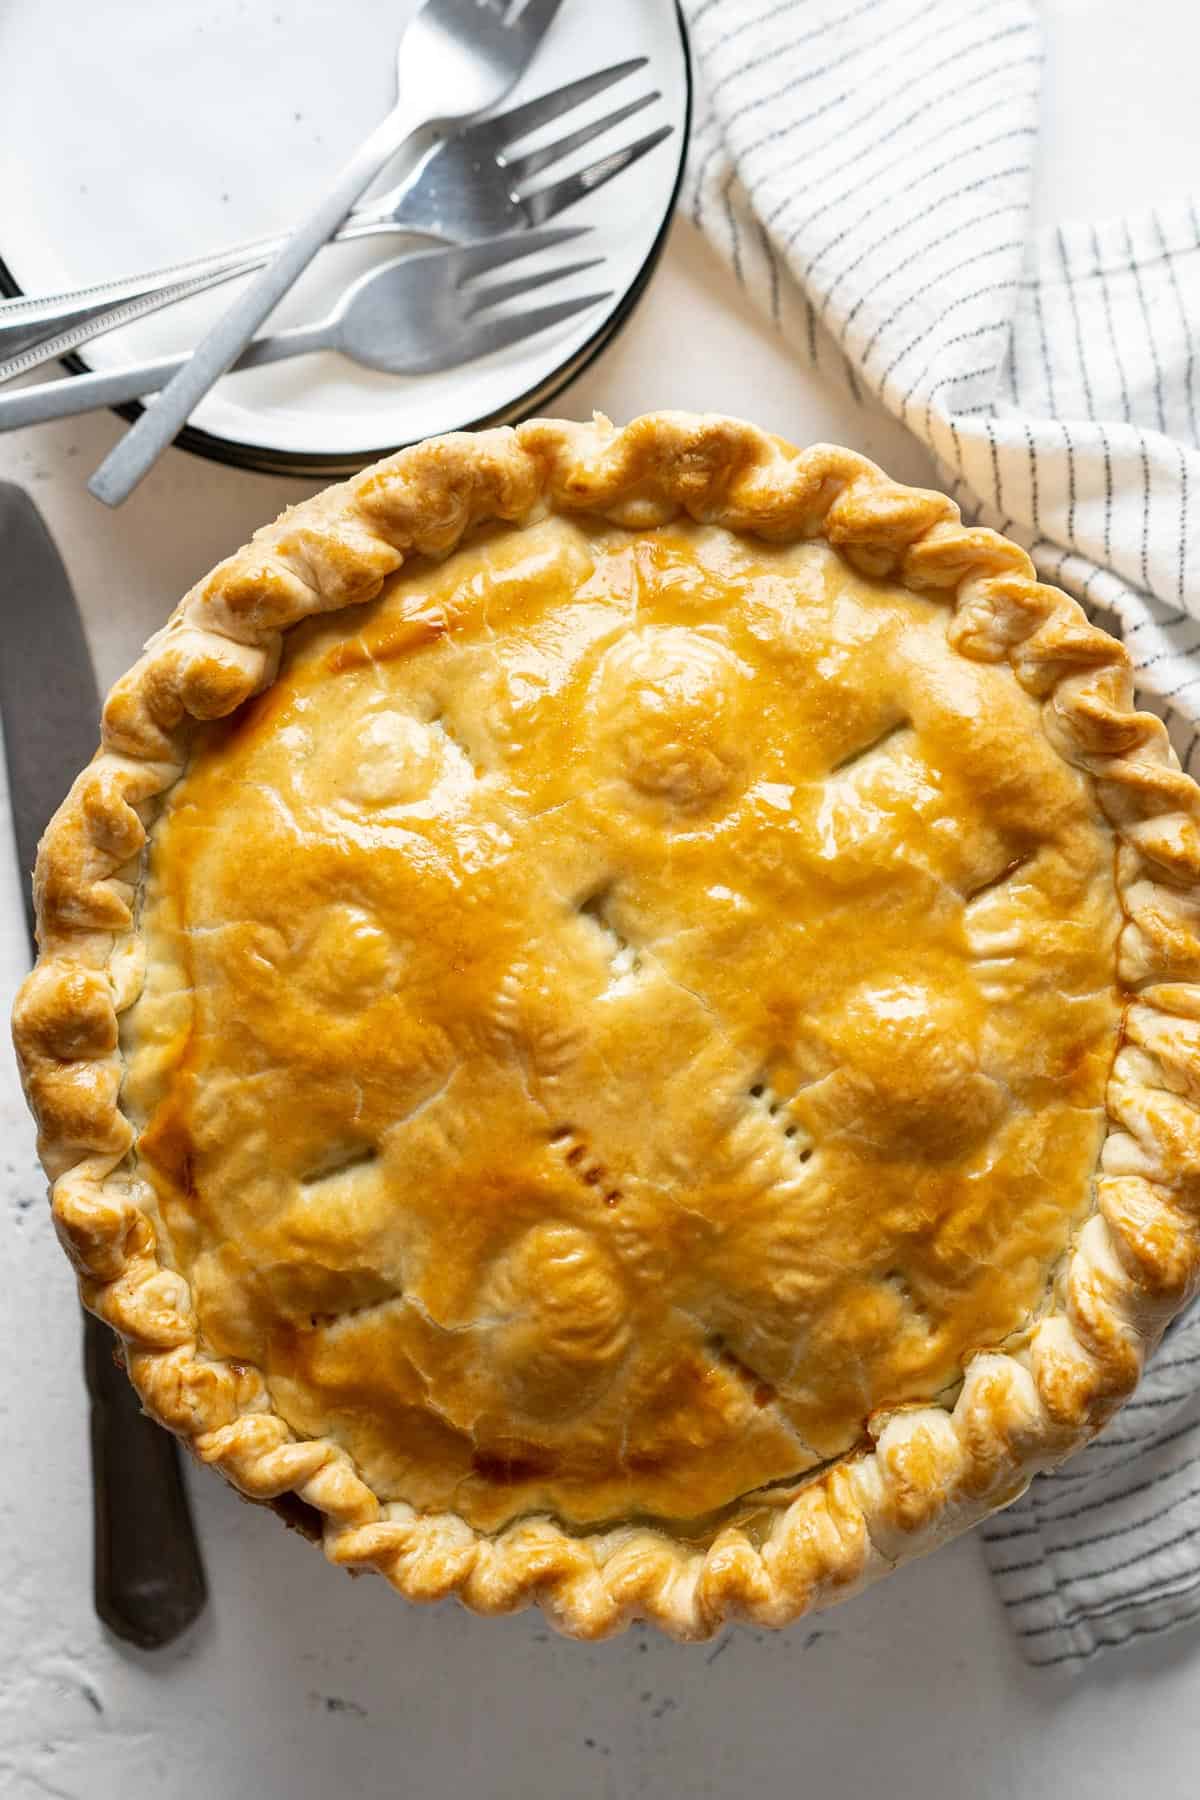 A whole pie on a cooling rack.